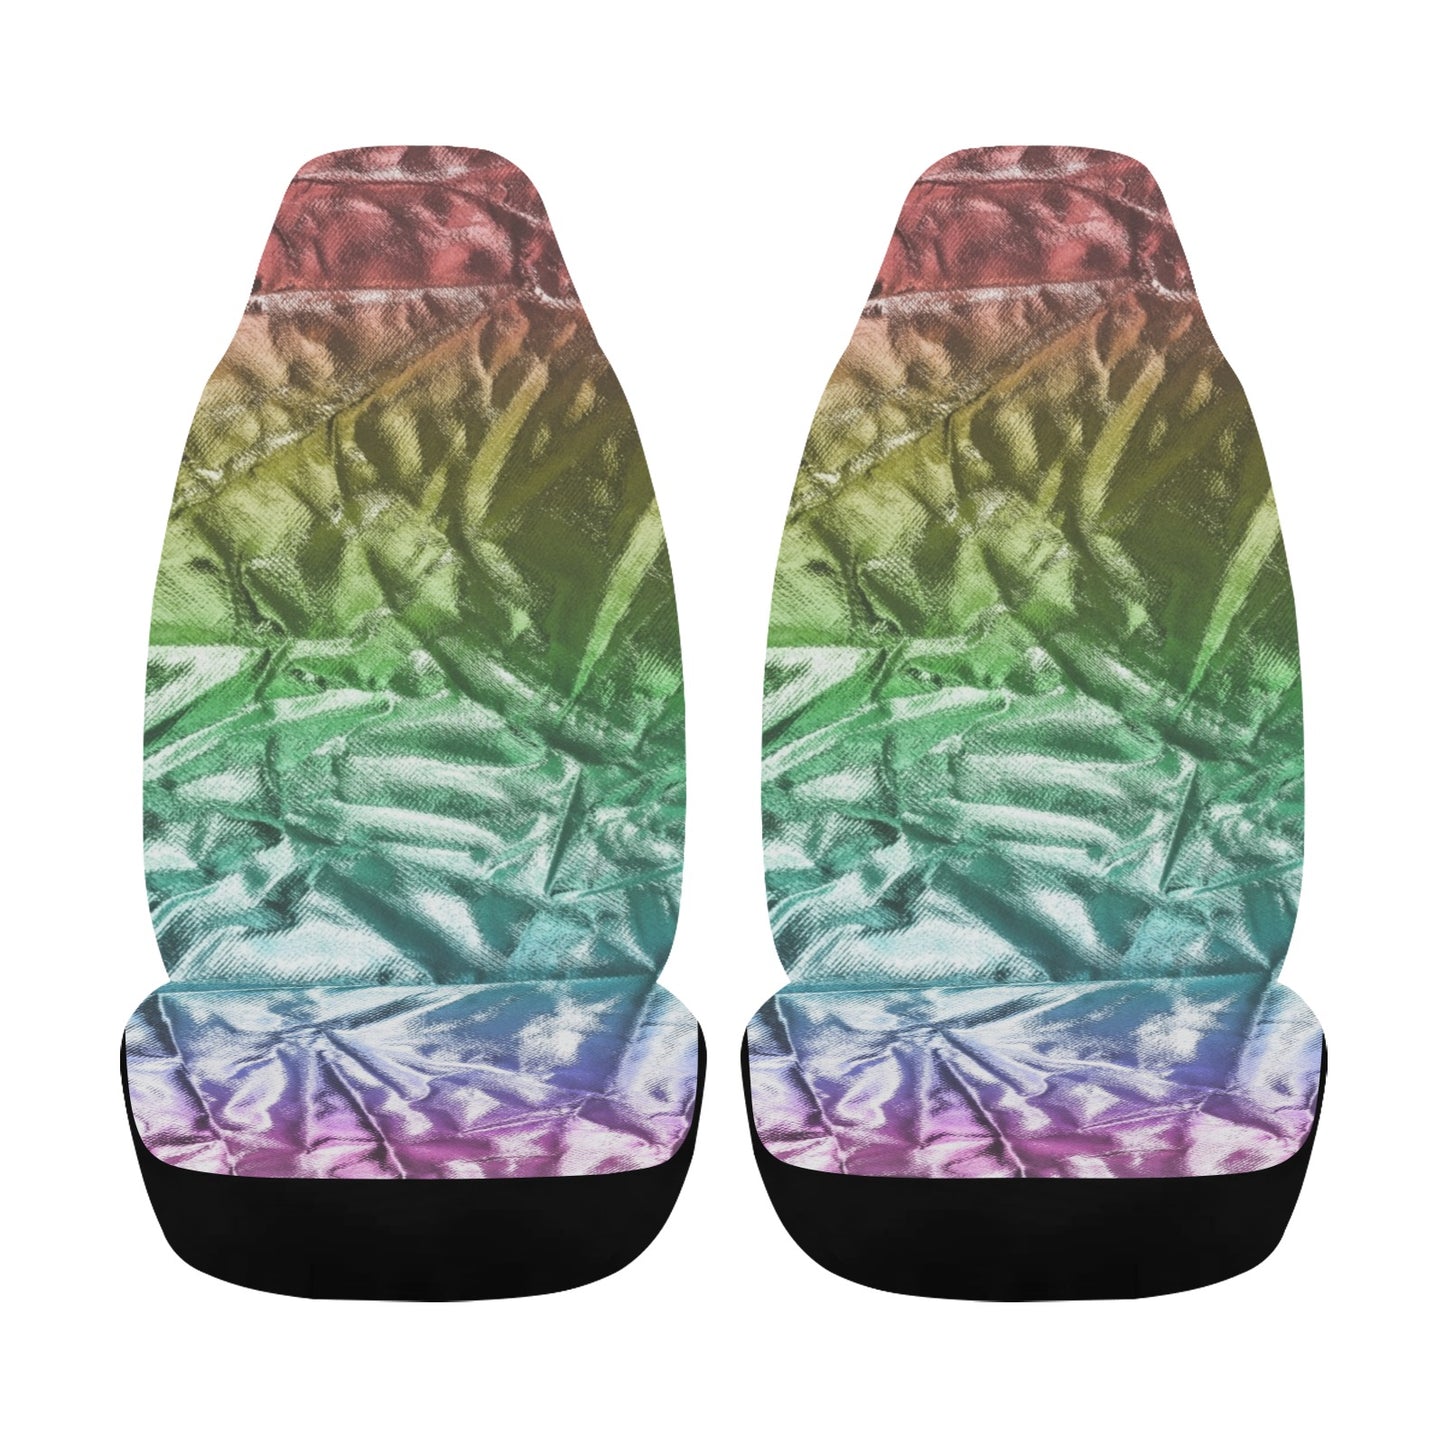 Car Seat Cover Rainbow Crush Airbag Compatible (Set of 2)